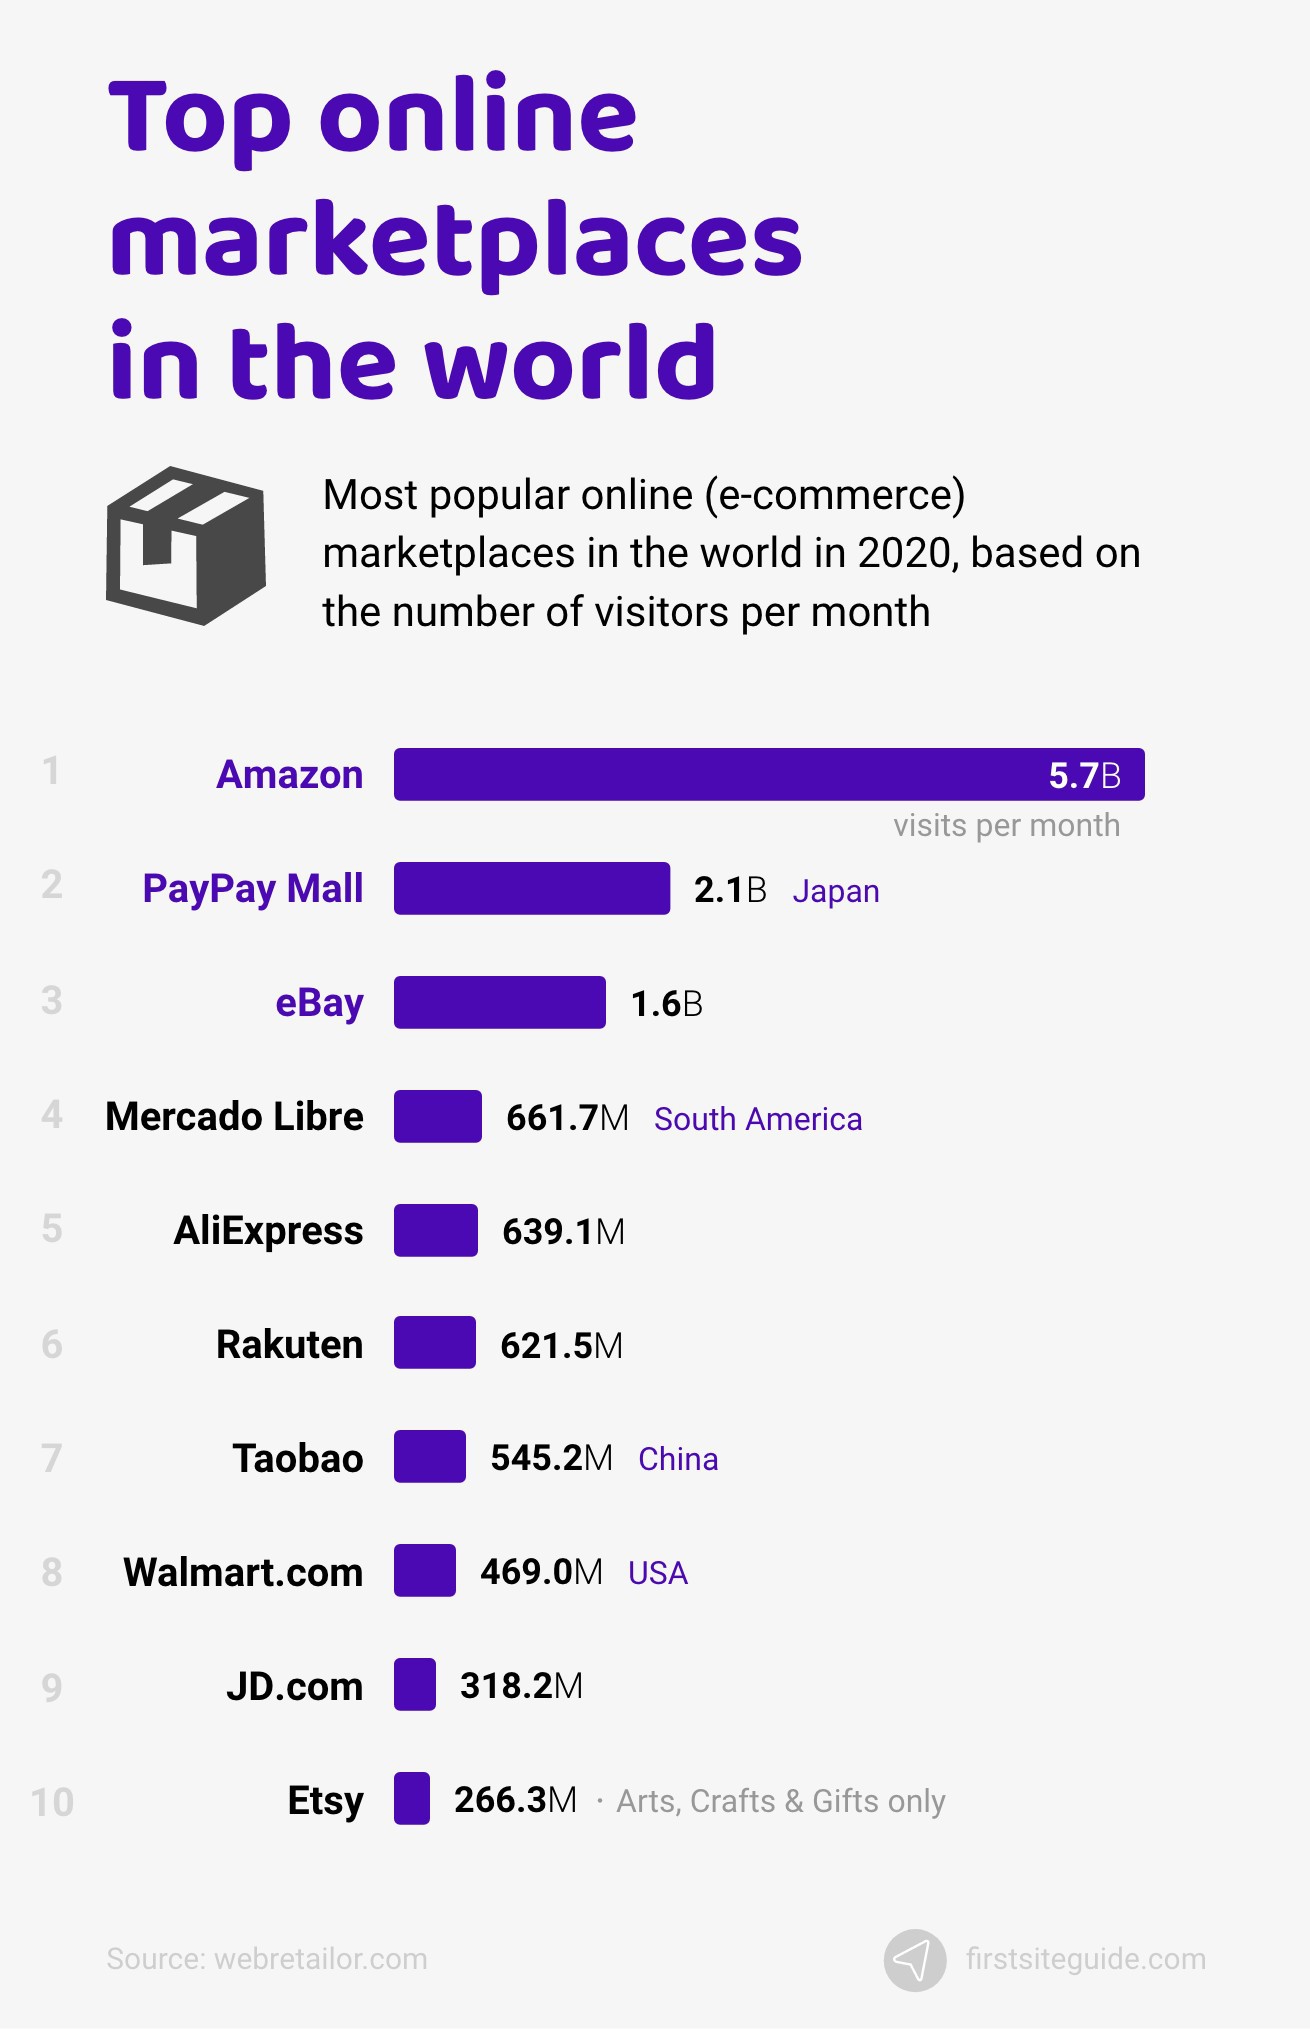 Top online marketplaces in the world